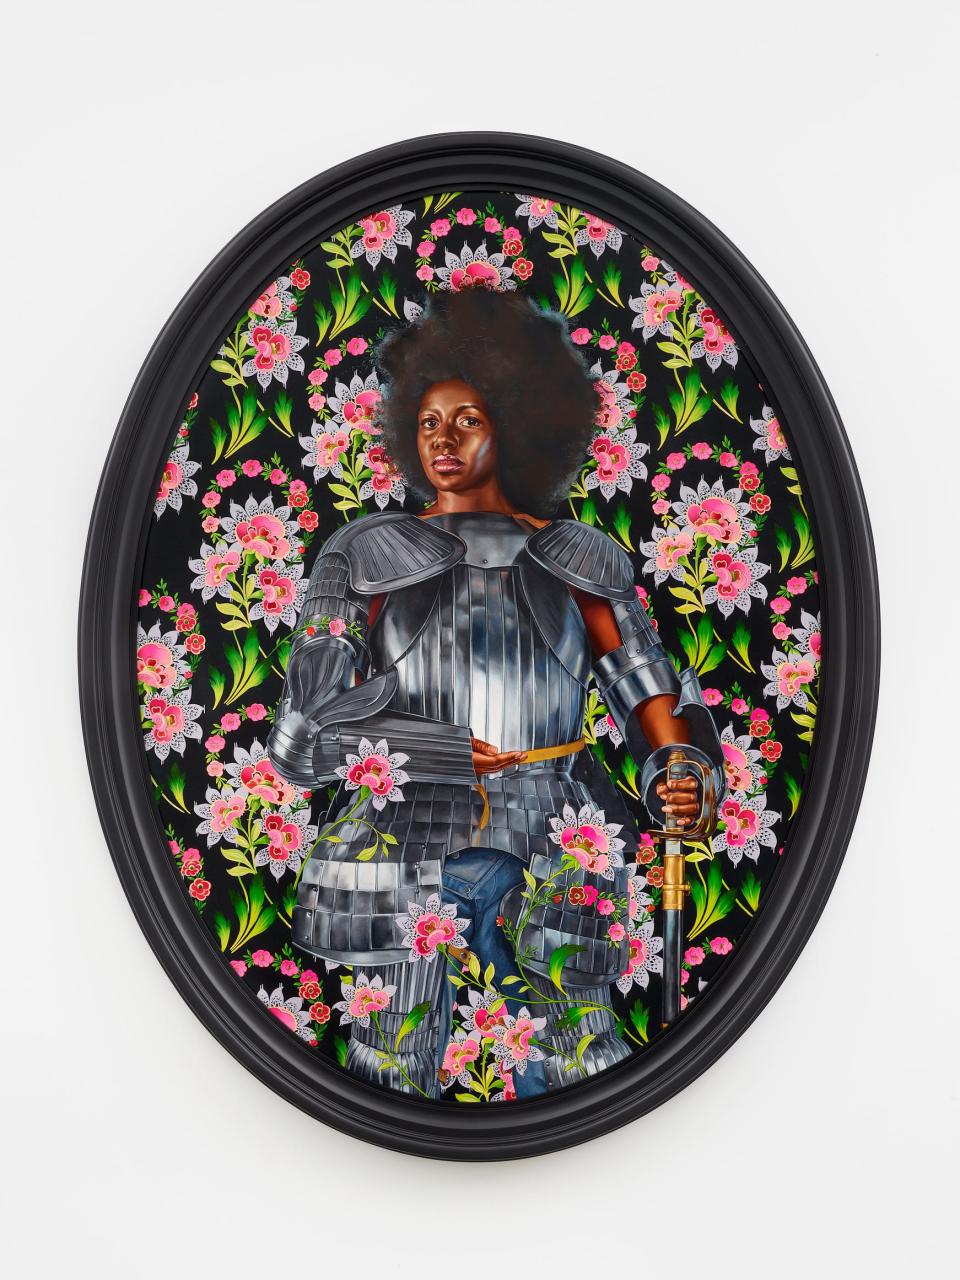 Kehinde Wiley's "Portrait of Nelly Moudime" is in the "Black American Portraits" show at the Memphis Brooks Museum of Art.